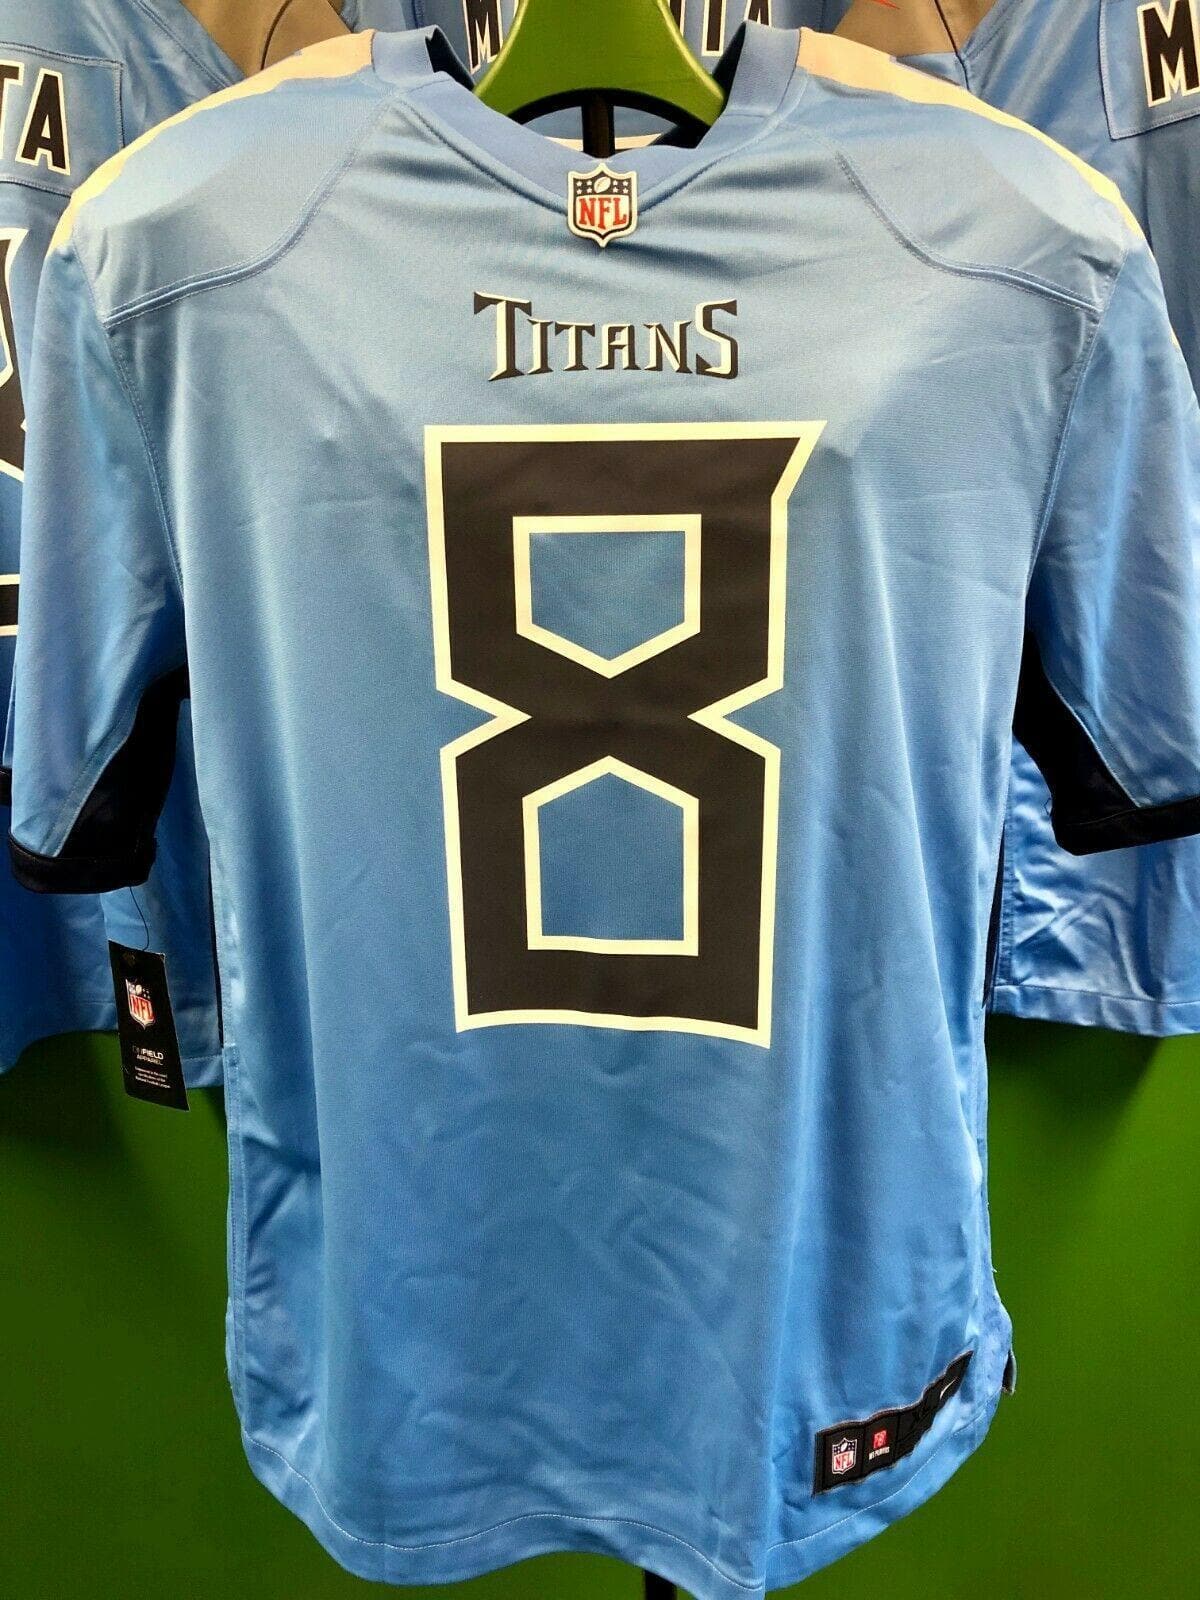 NFL Tennessee Titans Mariota #8 Game Jersey Men's XX-Large NWT